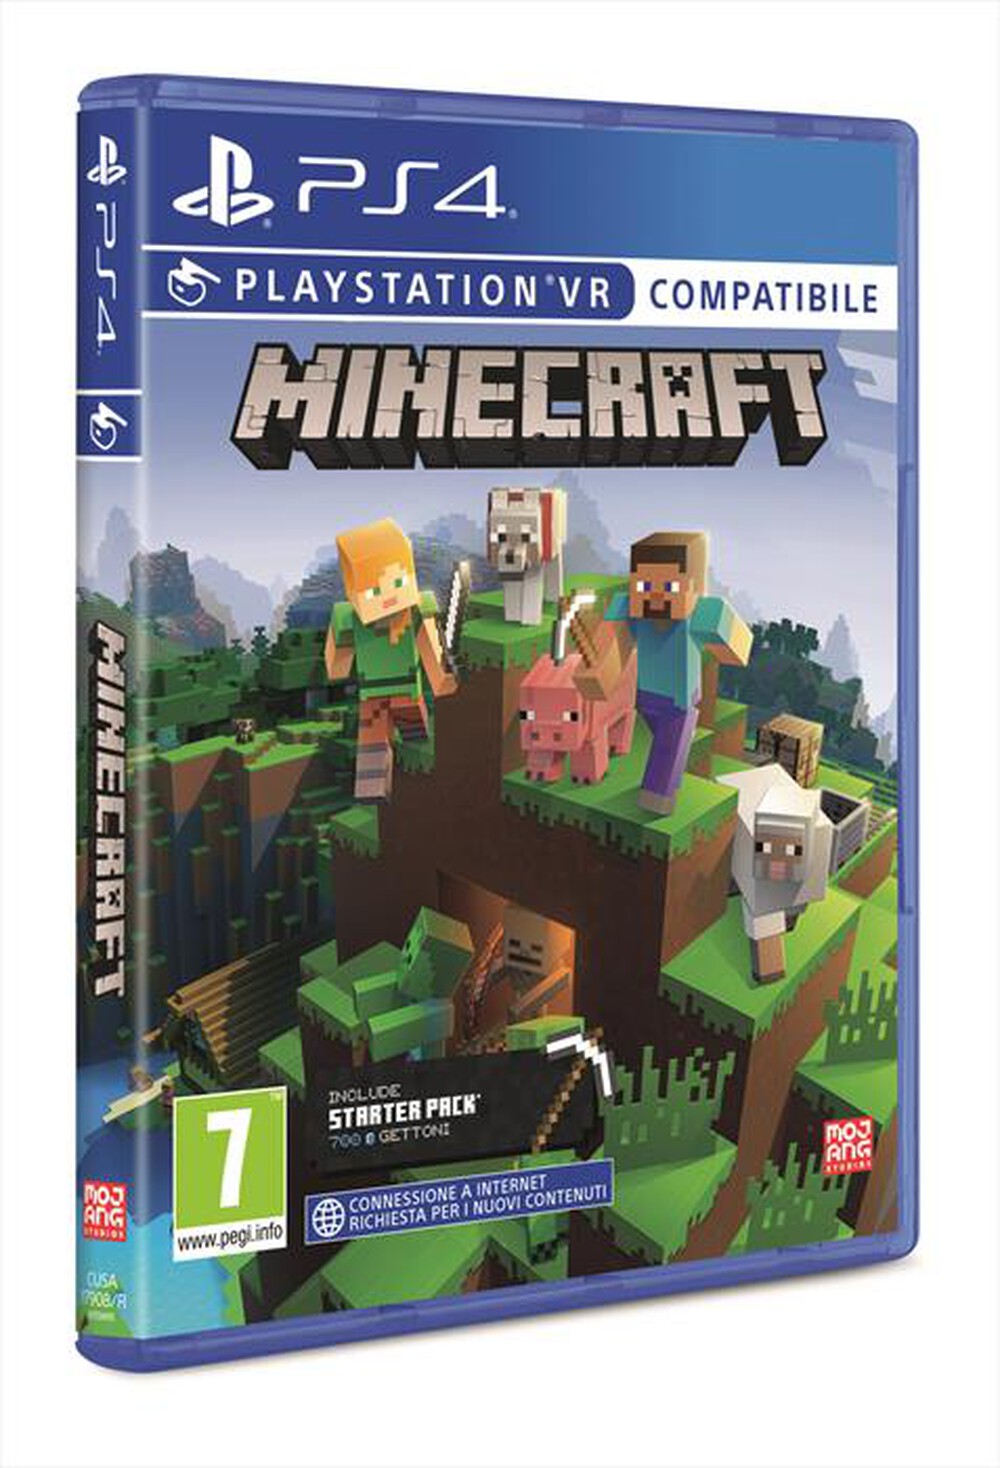 "SONY COMPUTER - MINECRAFT STARTER COLLECTION PS4"